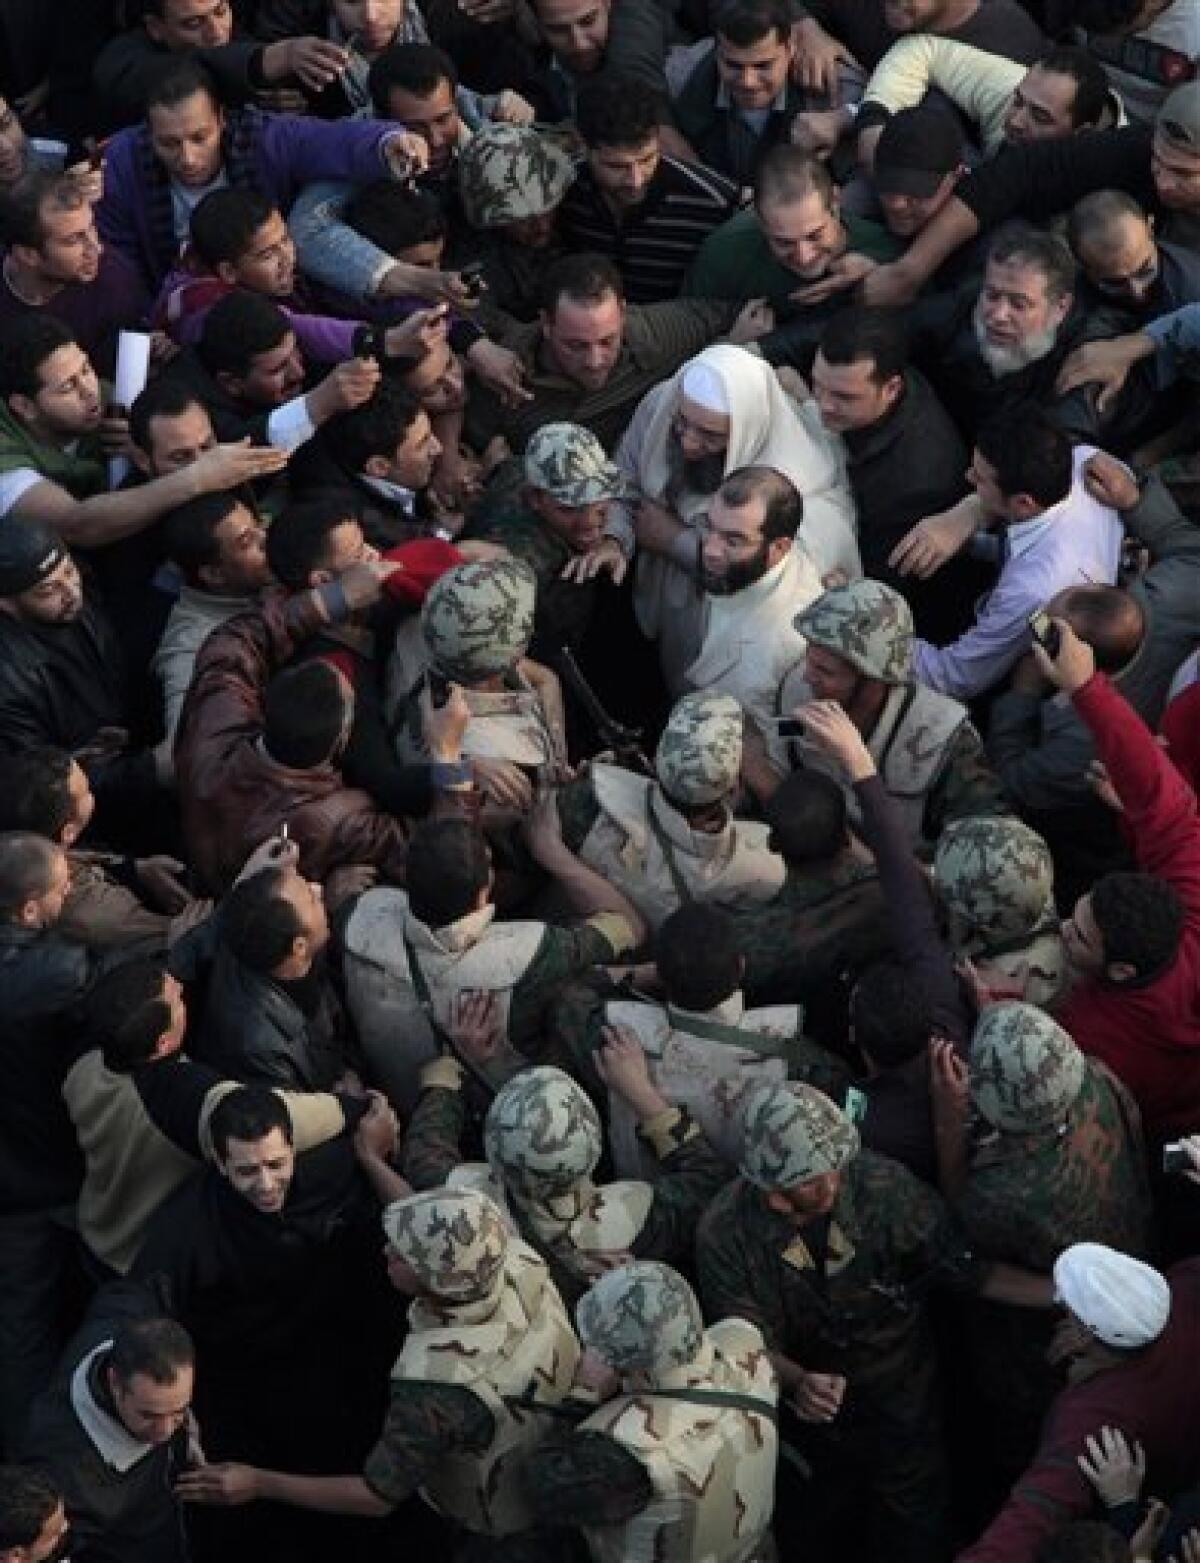 Soldiers surround an unidentified Muslim cleric, center in white, in Tahrir, or Liberation, Square in Cairo, Egypt, Tuesday, Feb. 1, 2011. More than a quarter-million people flooded into the heart of Cairo Tuesday, filling the city's main square in by far the largest demonstration in a week of unceasing demands for President Hosni Mubarak to leave after nearly 30 years in power. (AP Photo/Lefteris Pitarakis)